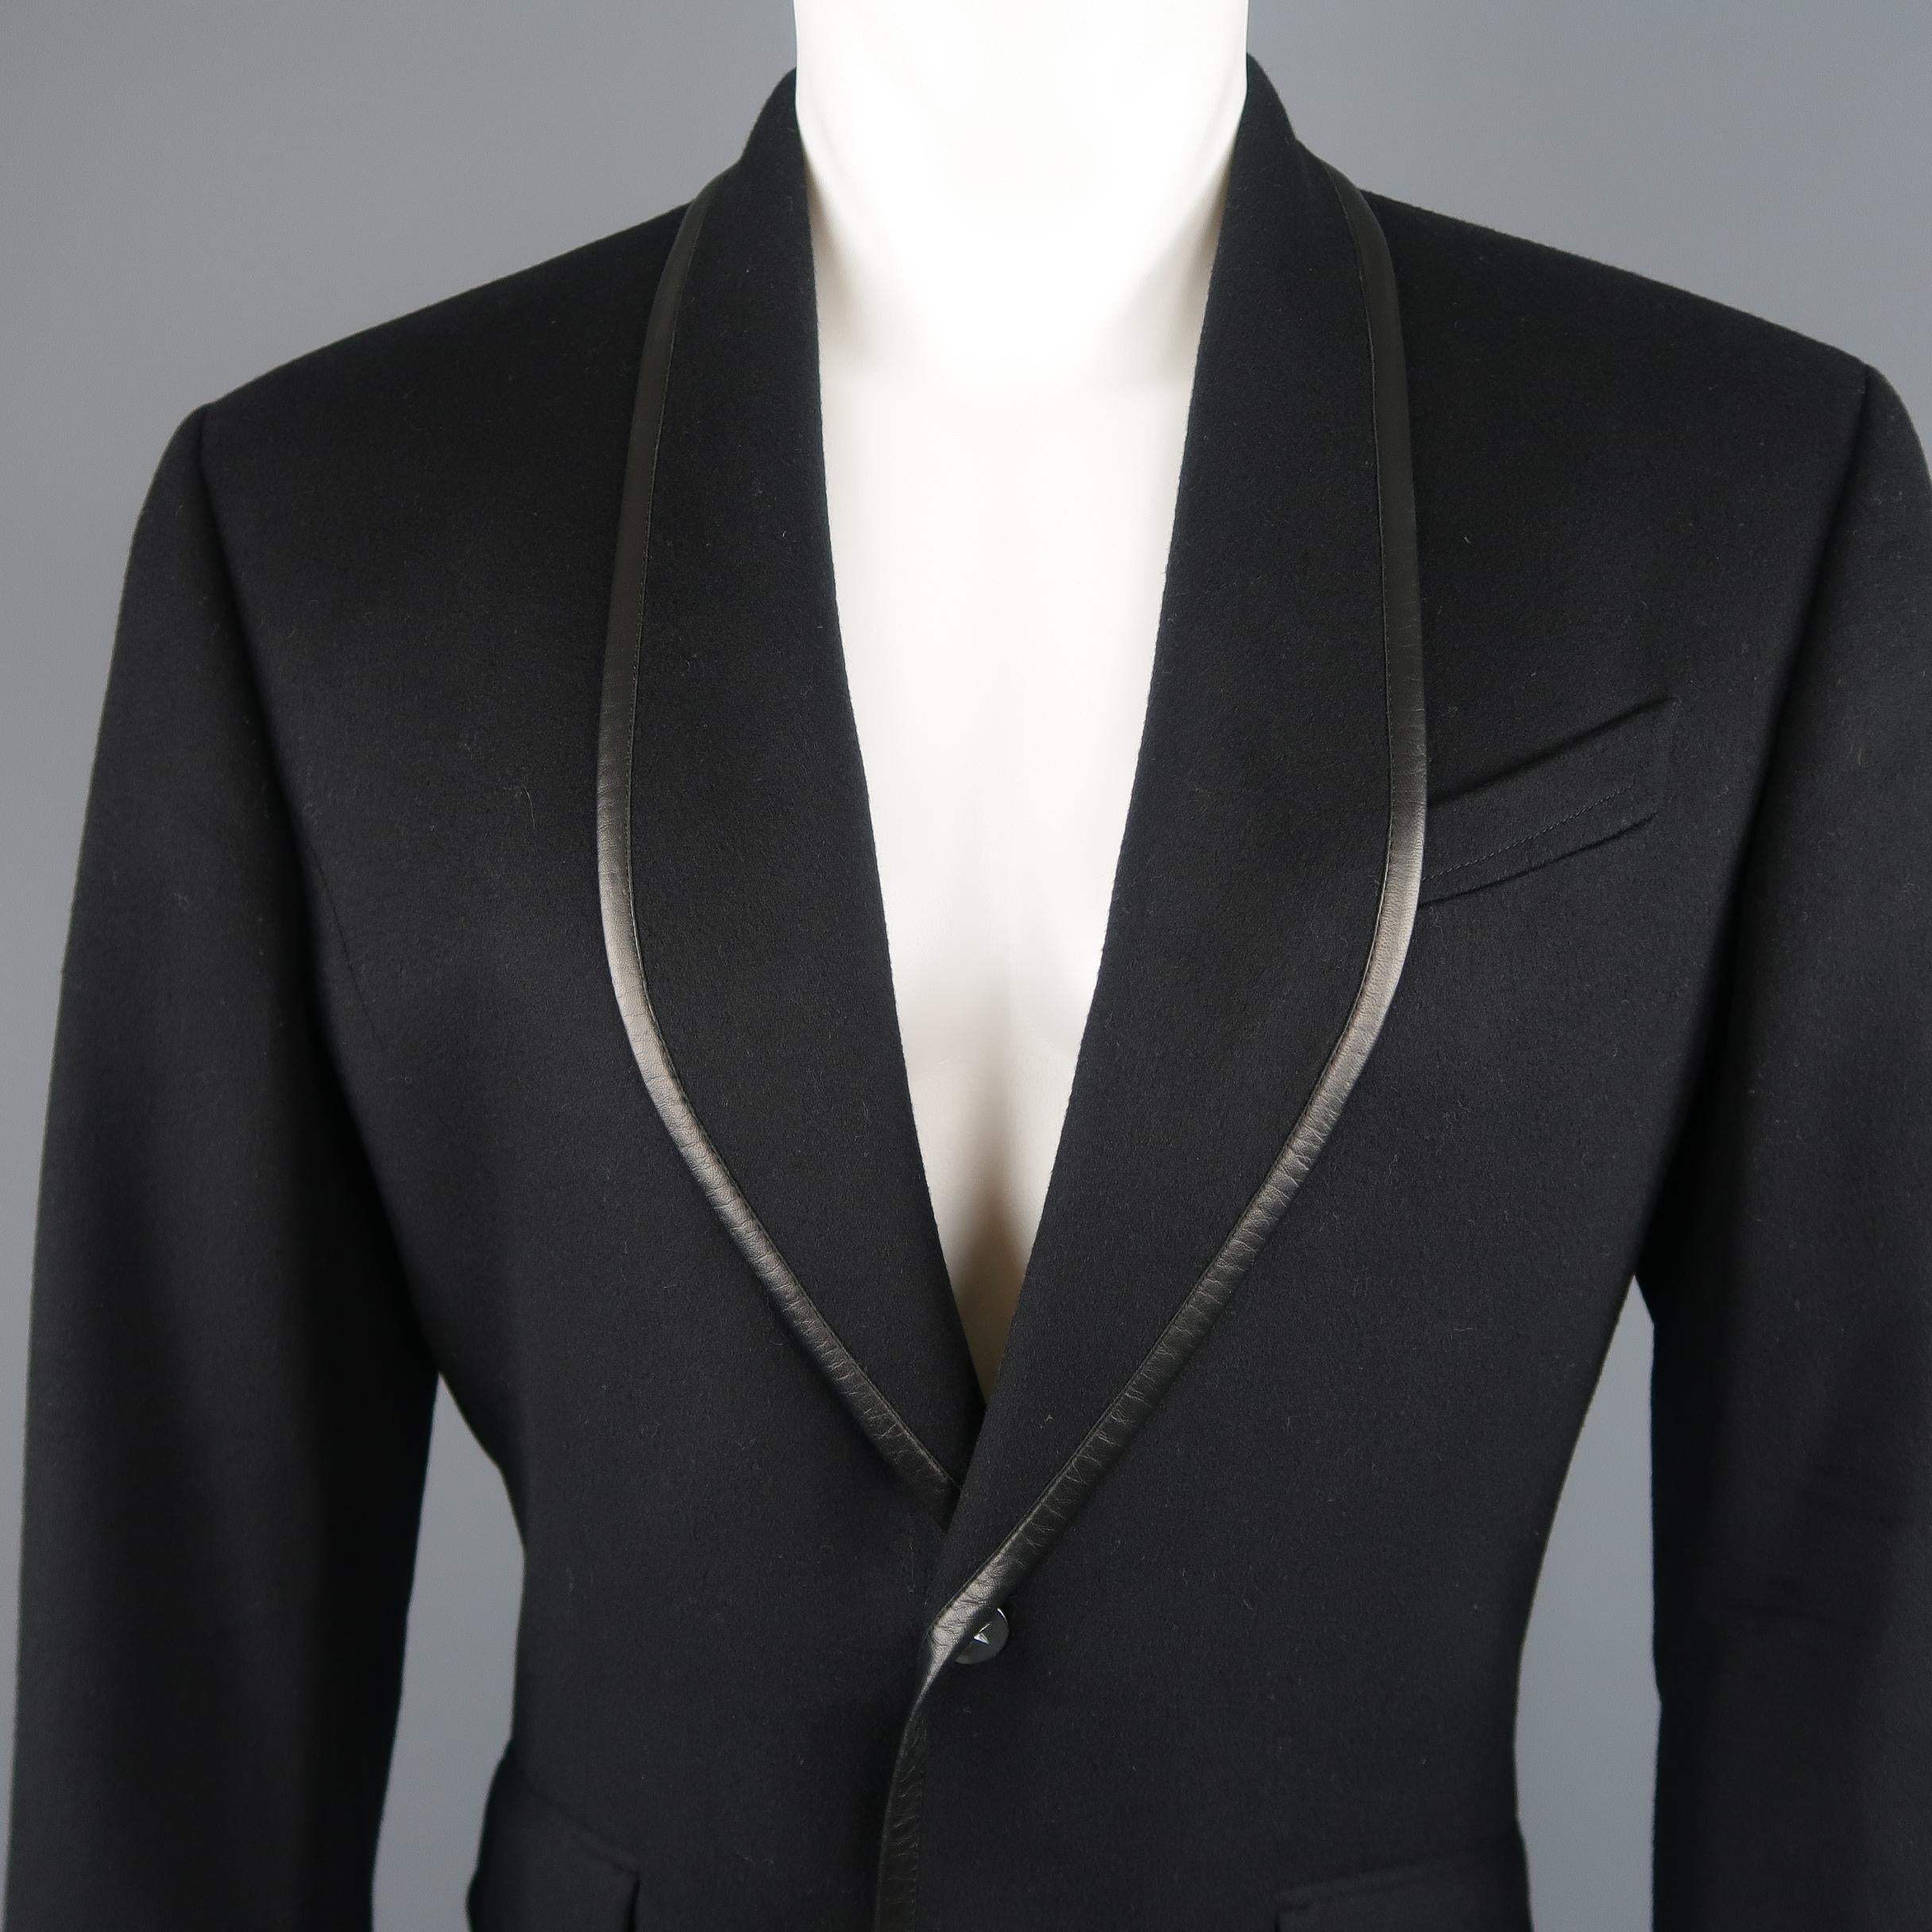 Vintage Thierry Mugler sport jacket comes in a wool cashmere blend felt with a shawl collar, two metal star snap closure, flap pockets, and leather piping. Made in France.
 
Excellent Pre-Owned Condition.
Marked: EU 48
 
Measurements:
 
Shoulder: 19